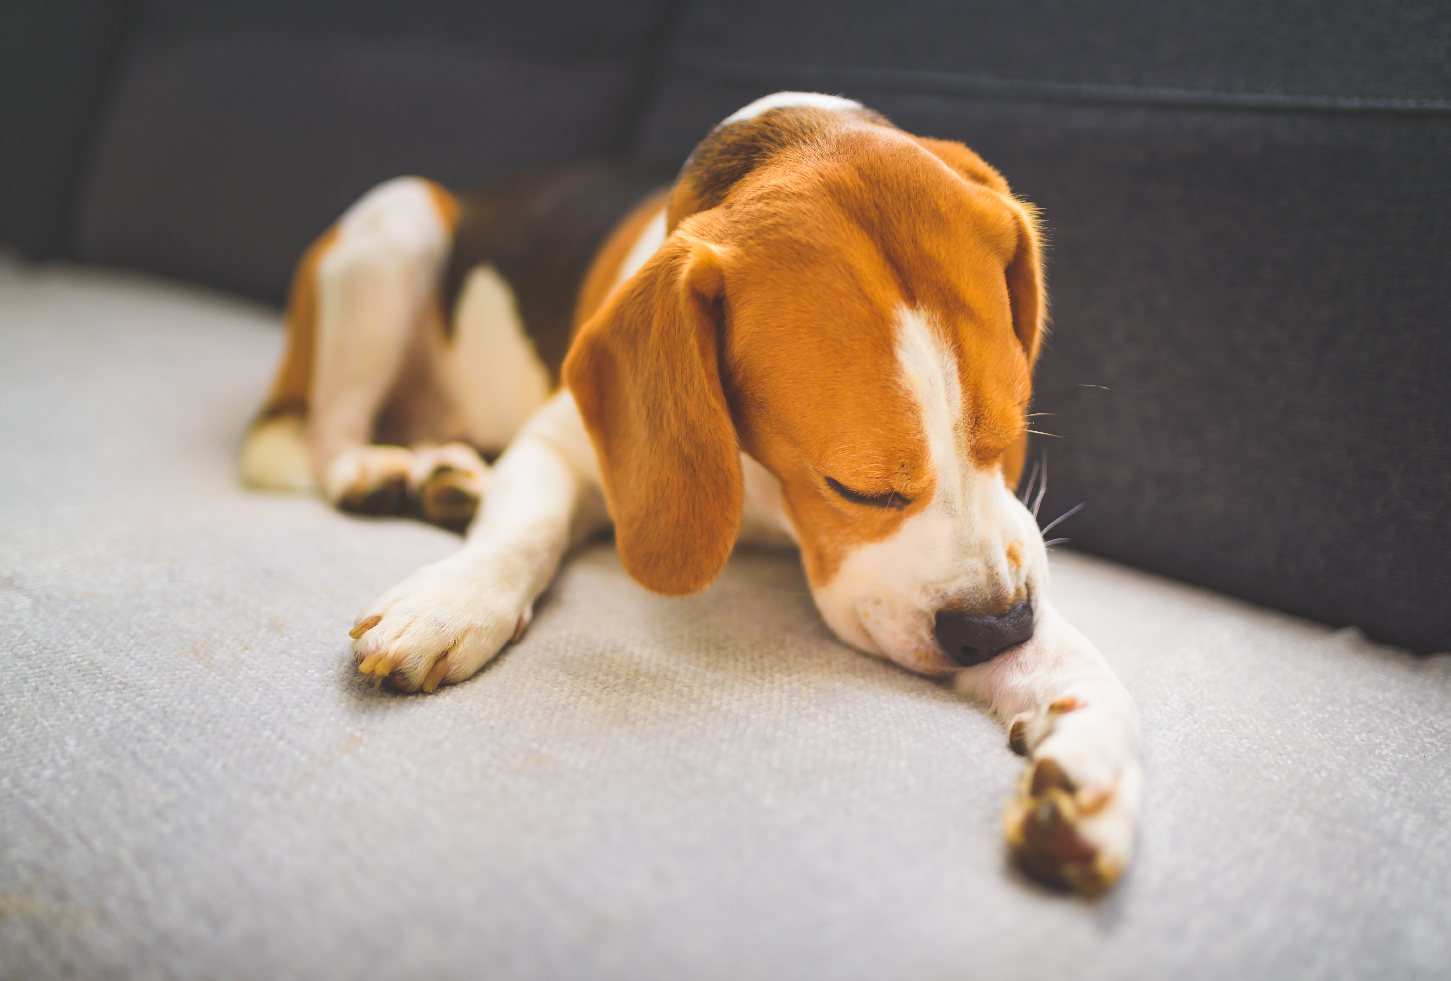 How to Treat an Abscess on a Dog at Home the Right Way